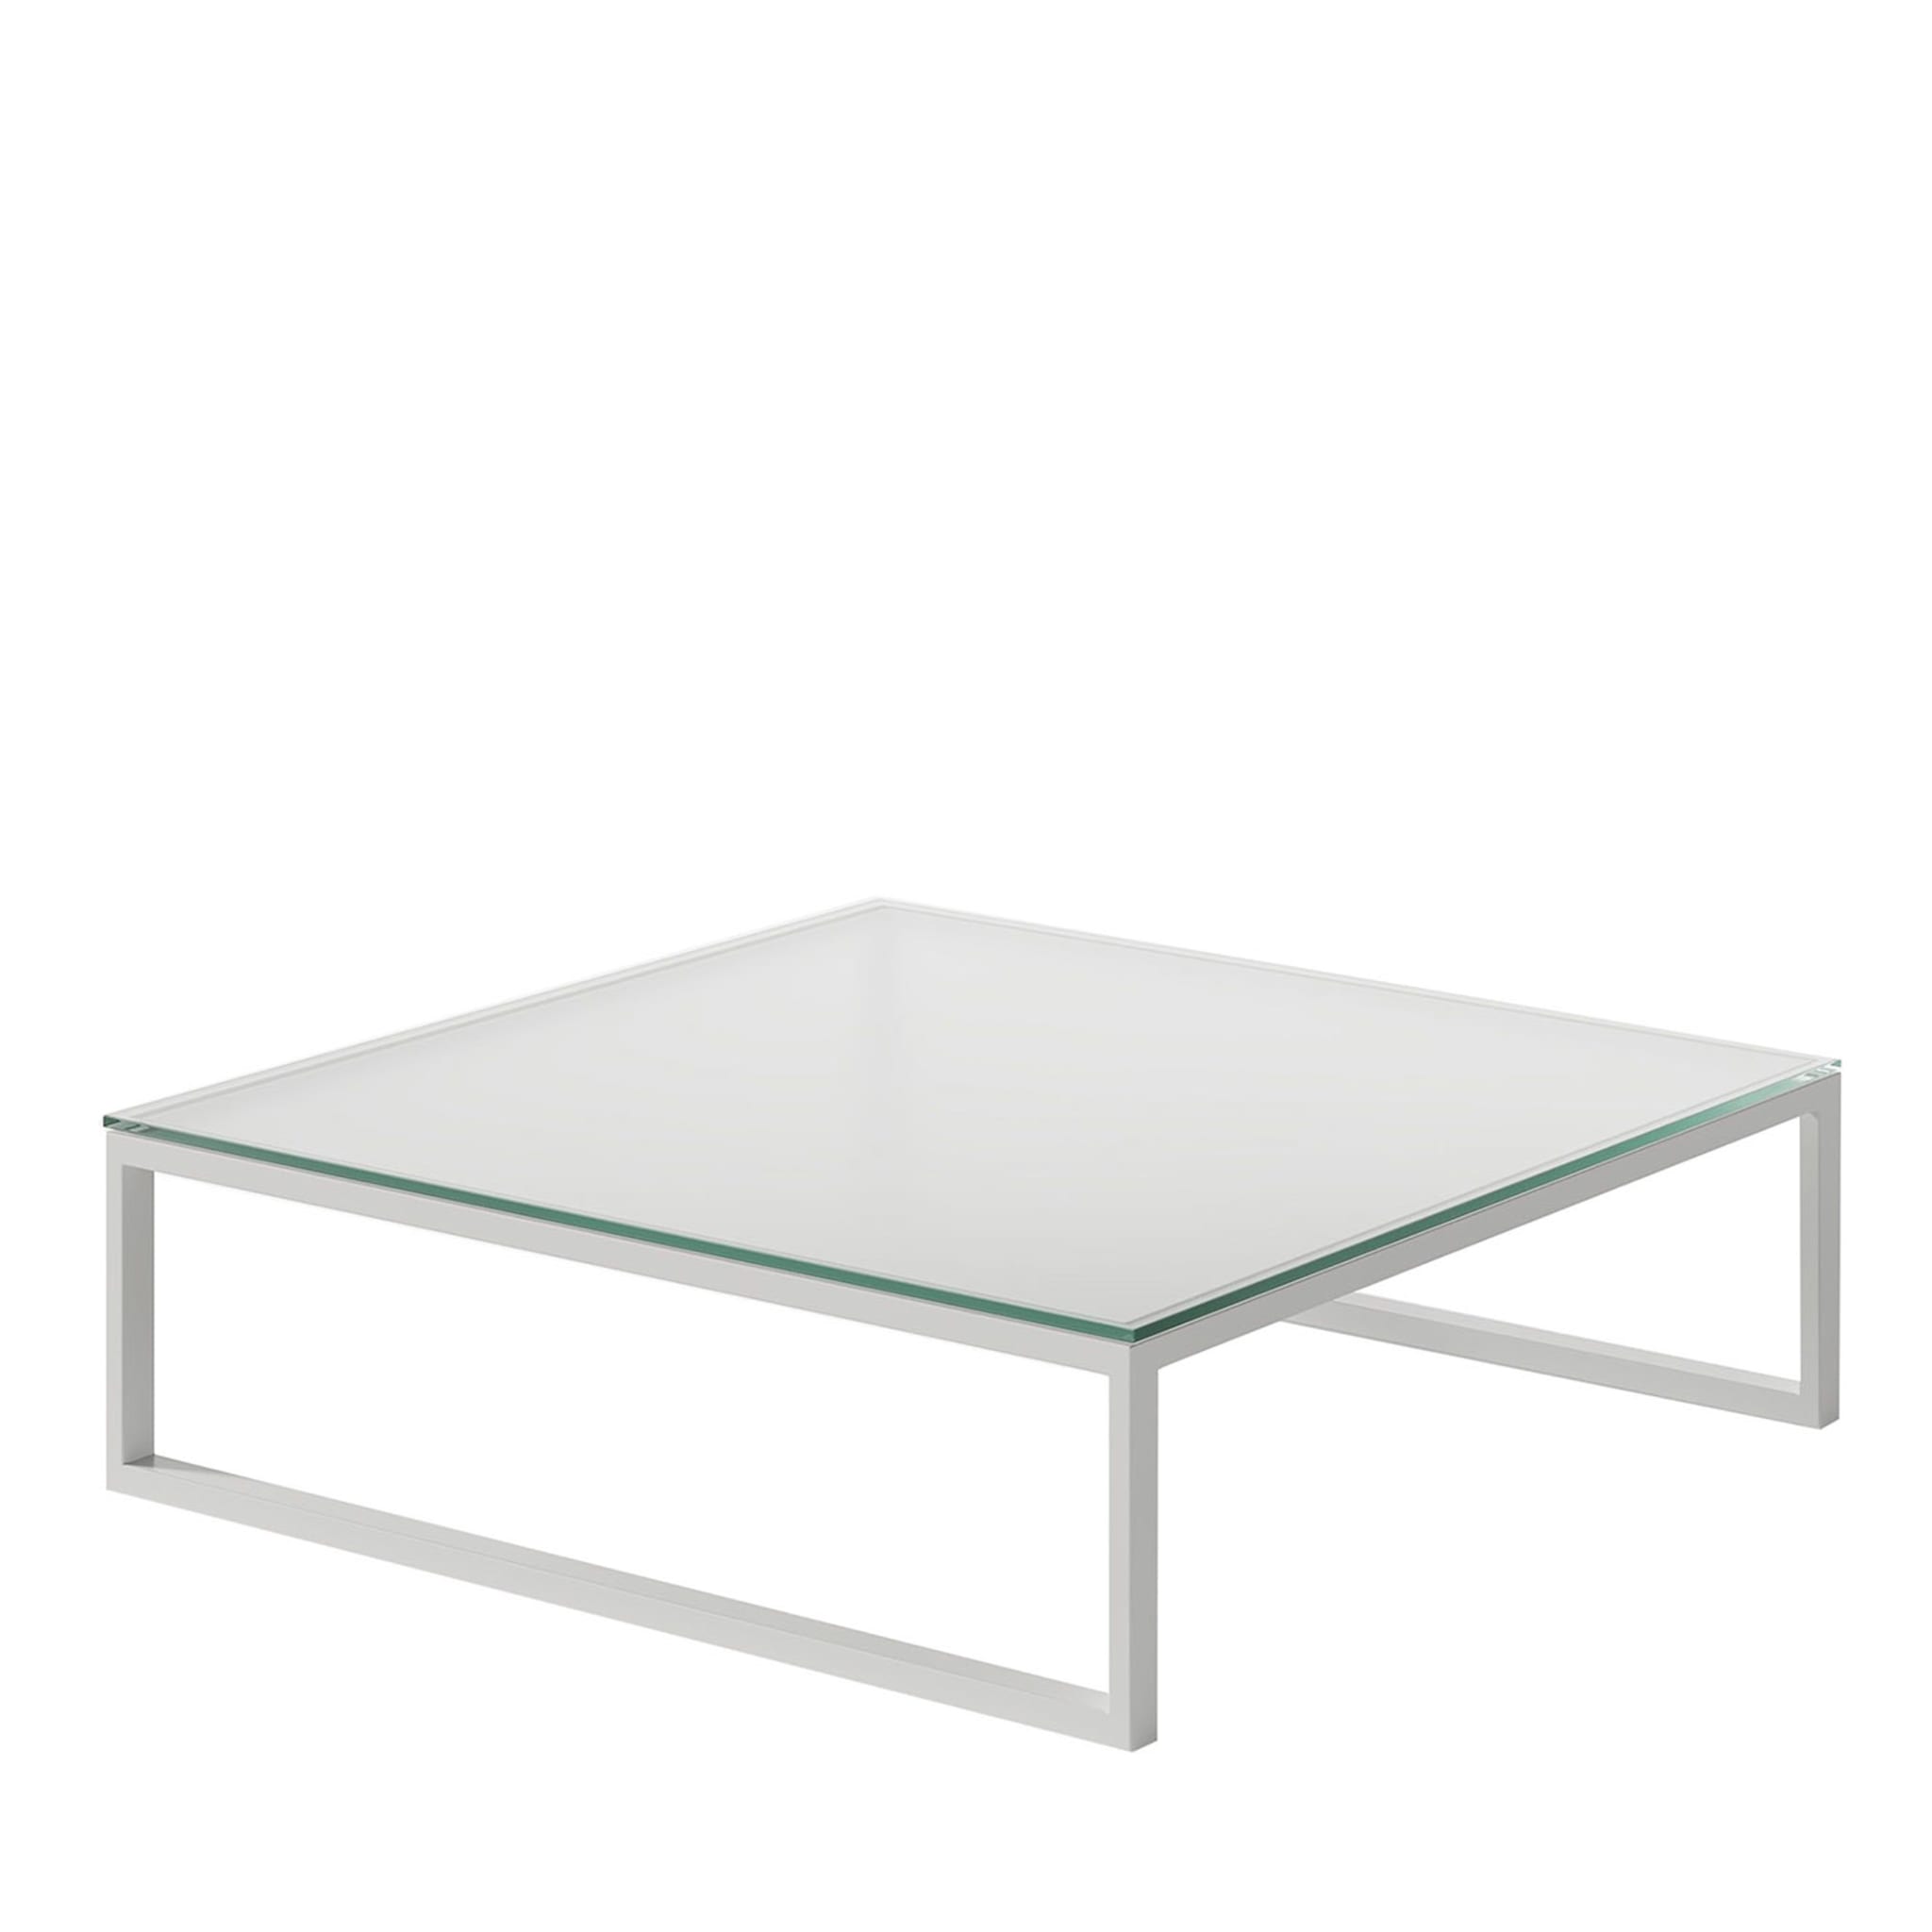 Metropolitan Square White Coffee Table by Carlo Colombo #1 - Main view